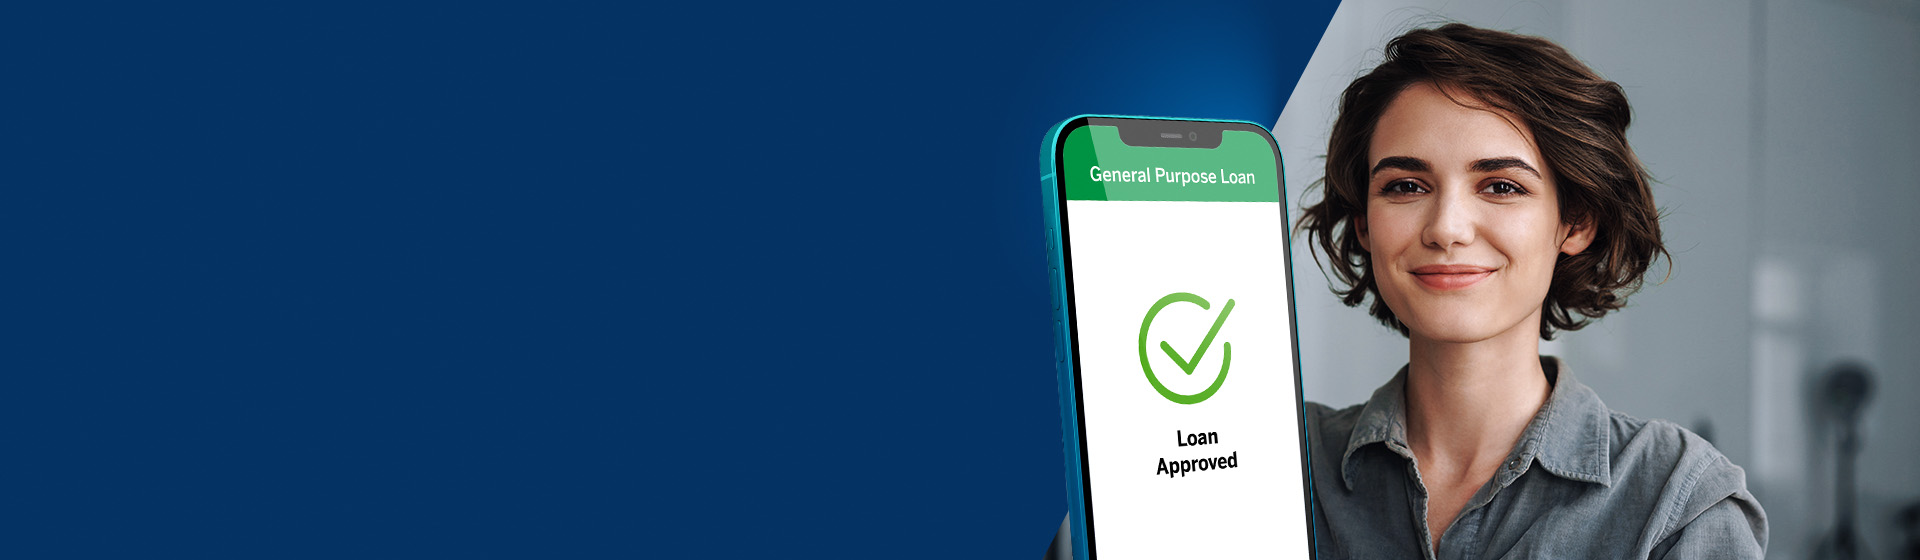 Garanti BBVA offers the best loan options for all your needs! 